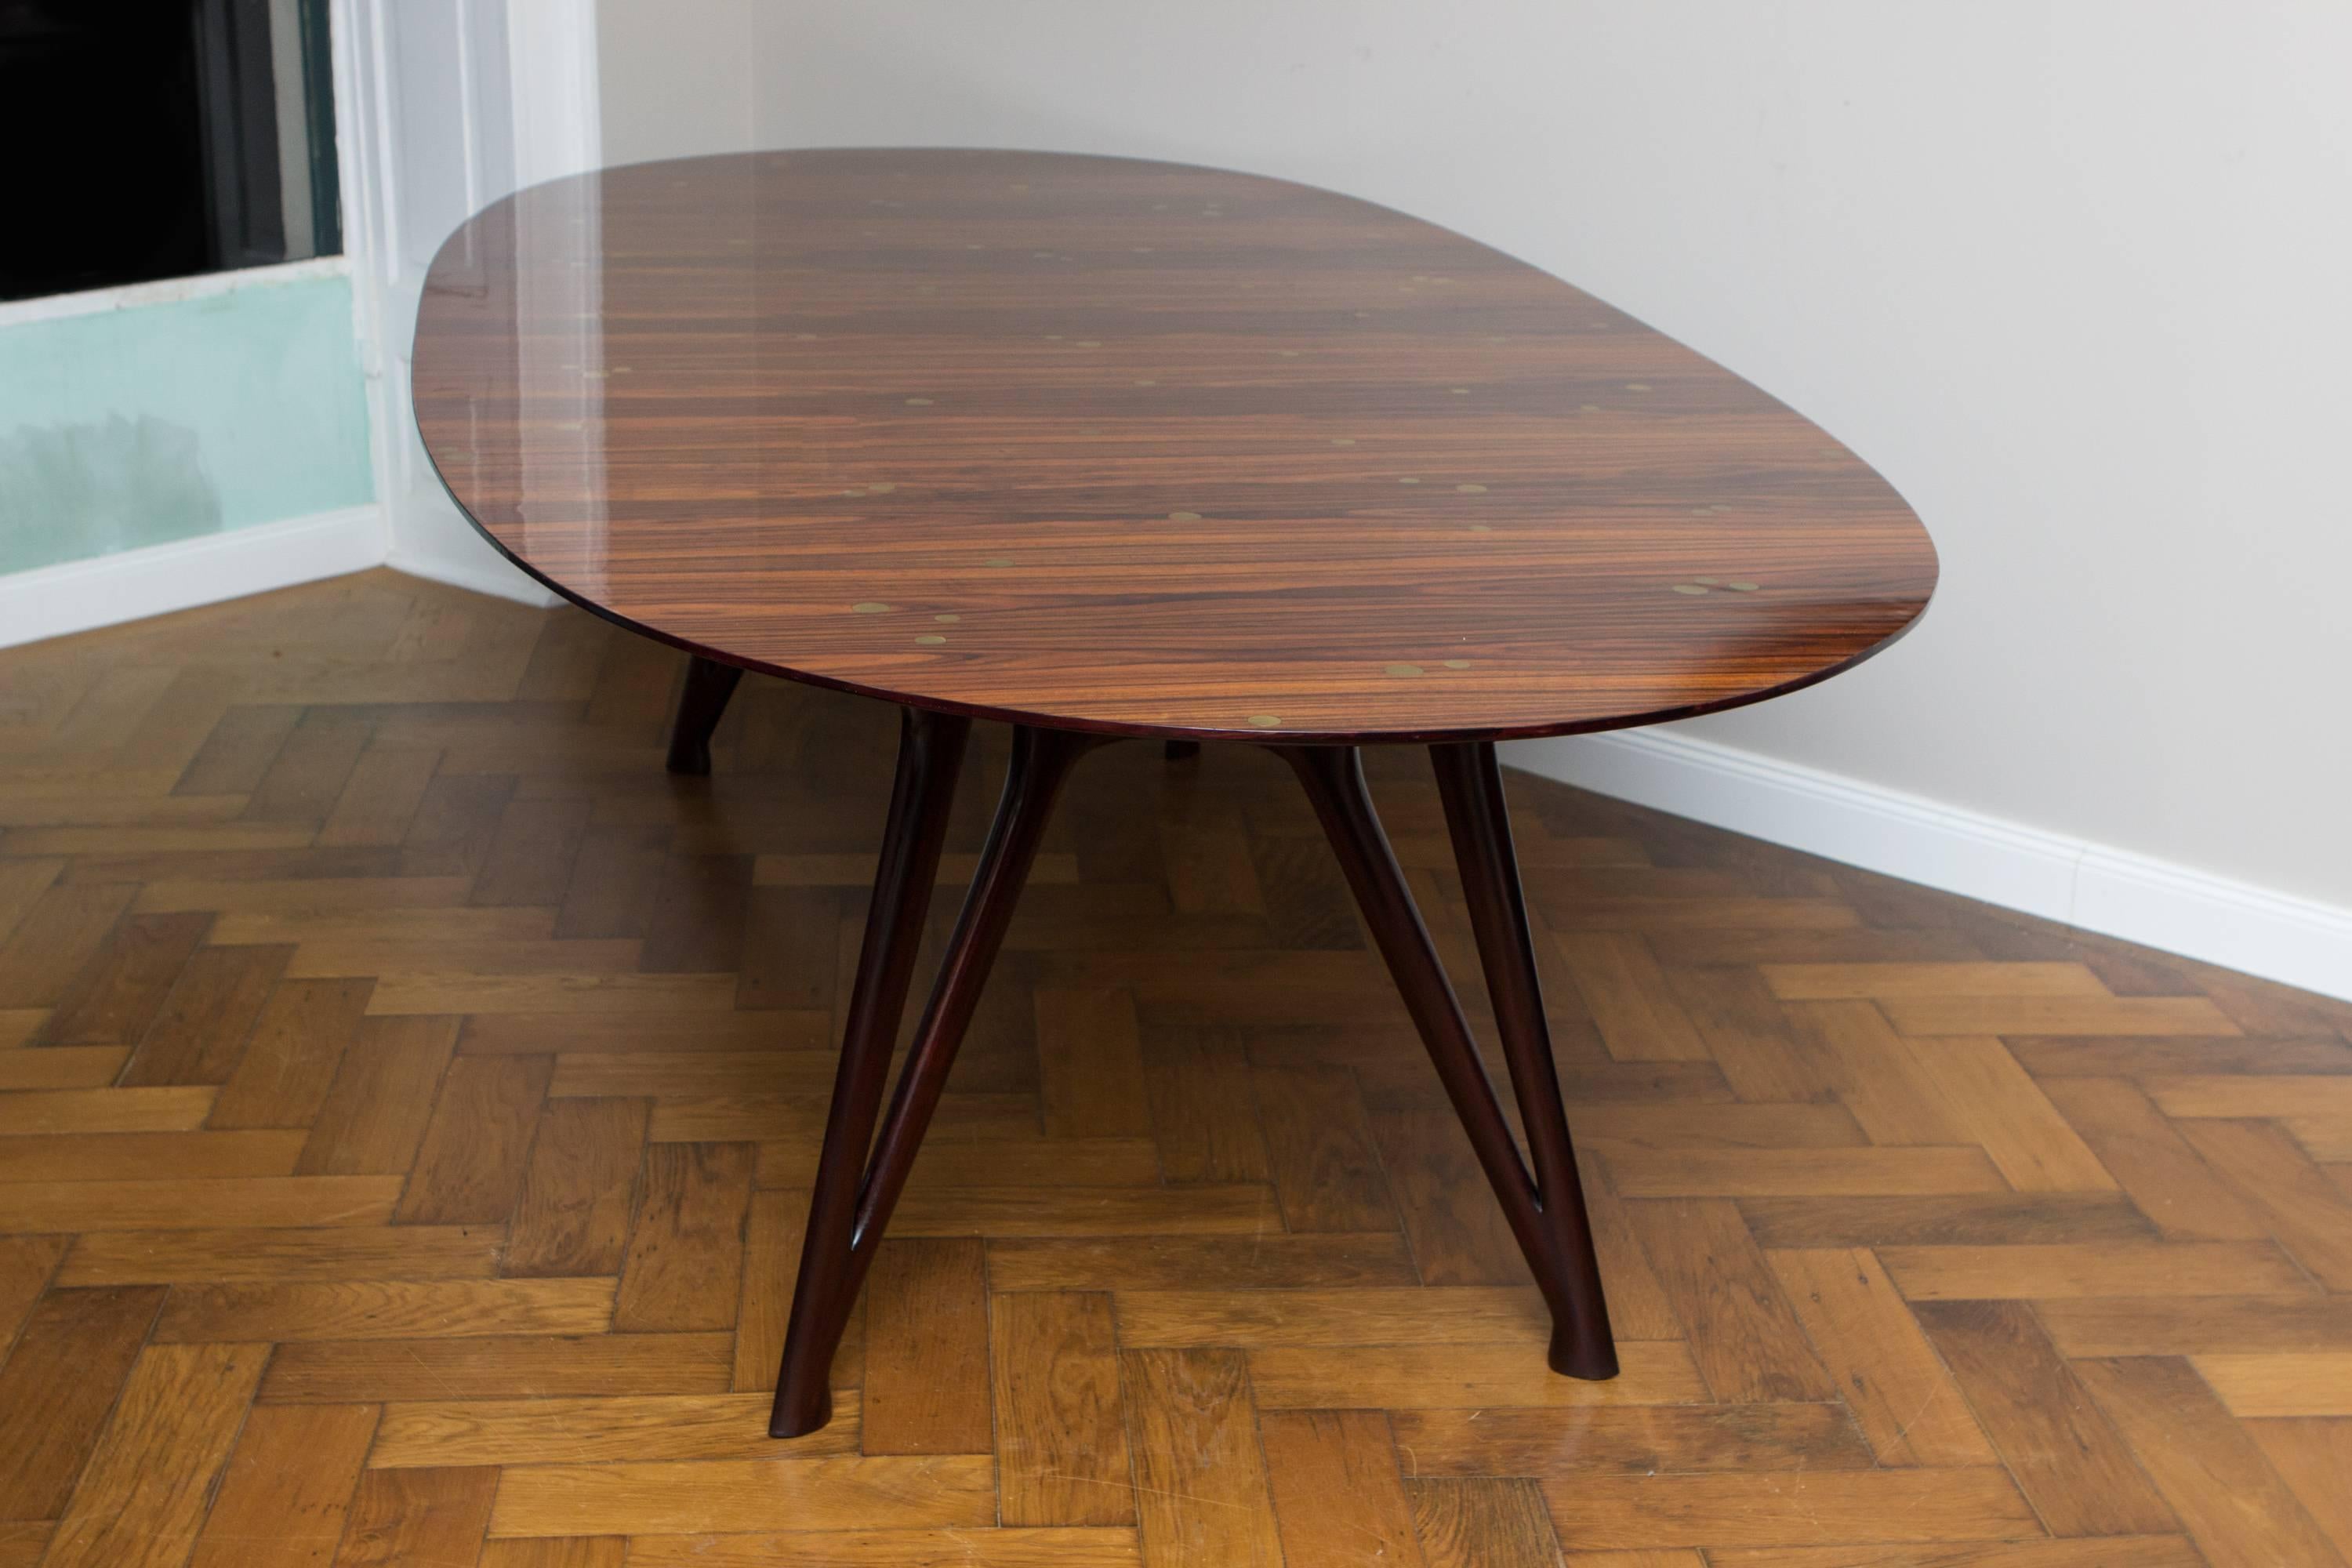 Amazing dining table, Italy circa 1950, attributed to Ico Parisi, all in all restored, elegant organic shaped dark brown ebony legs, oval polished jacaranda, rosewood table top with countless inlay brass dots in different sizes, the border of the